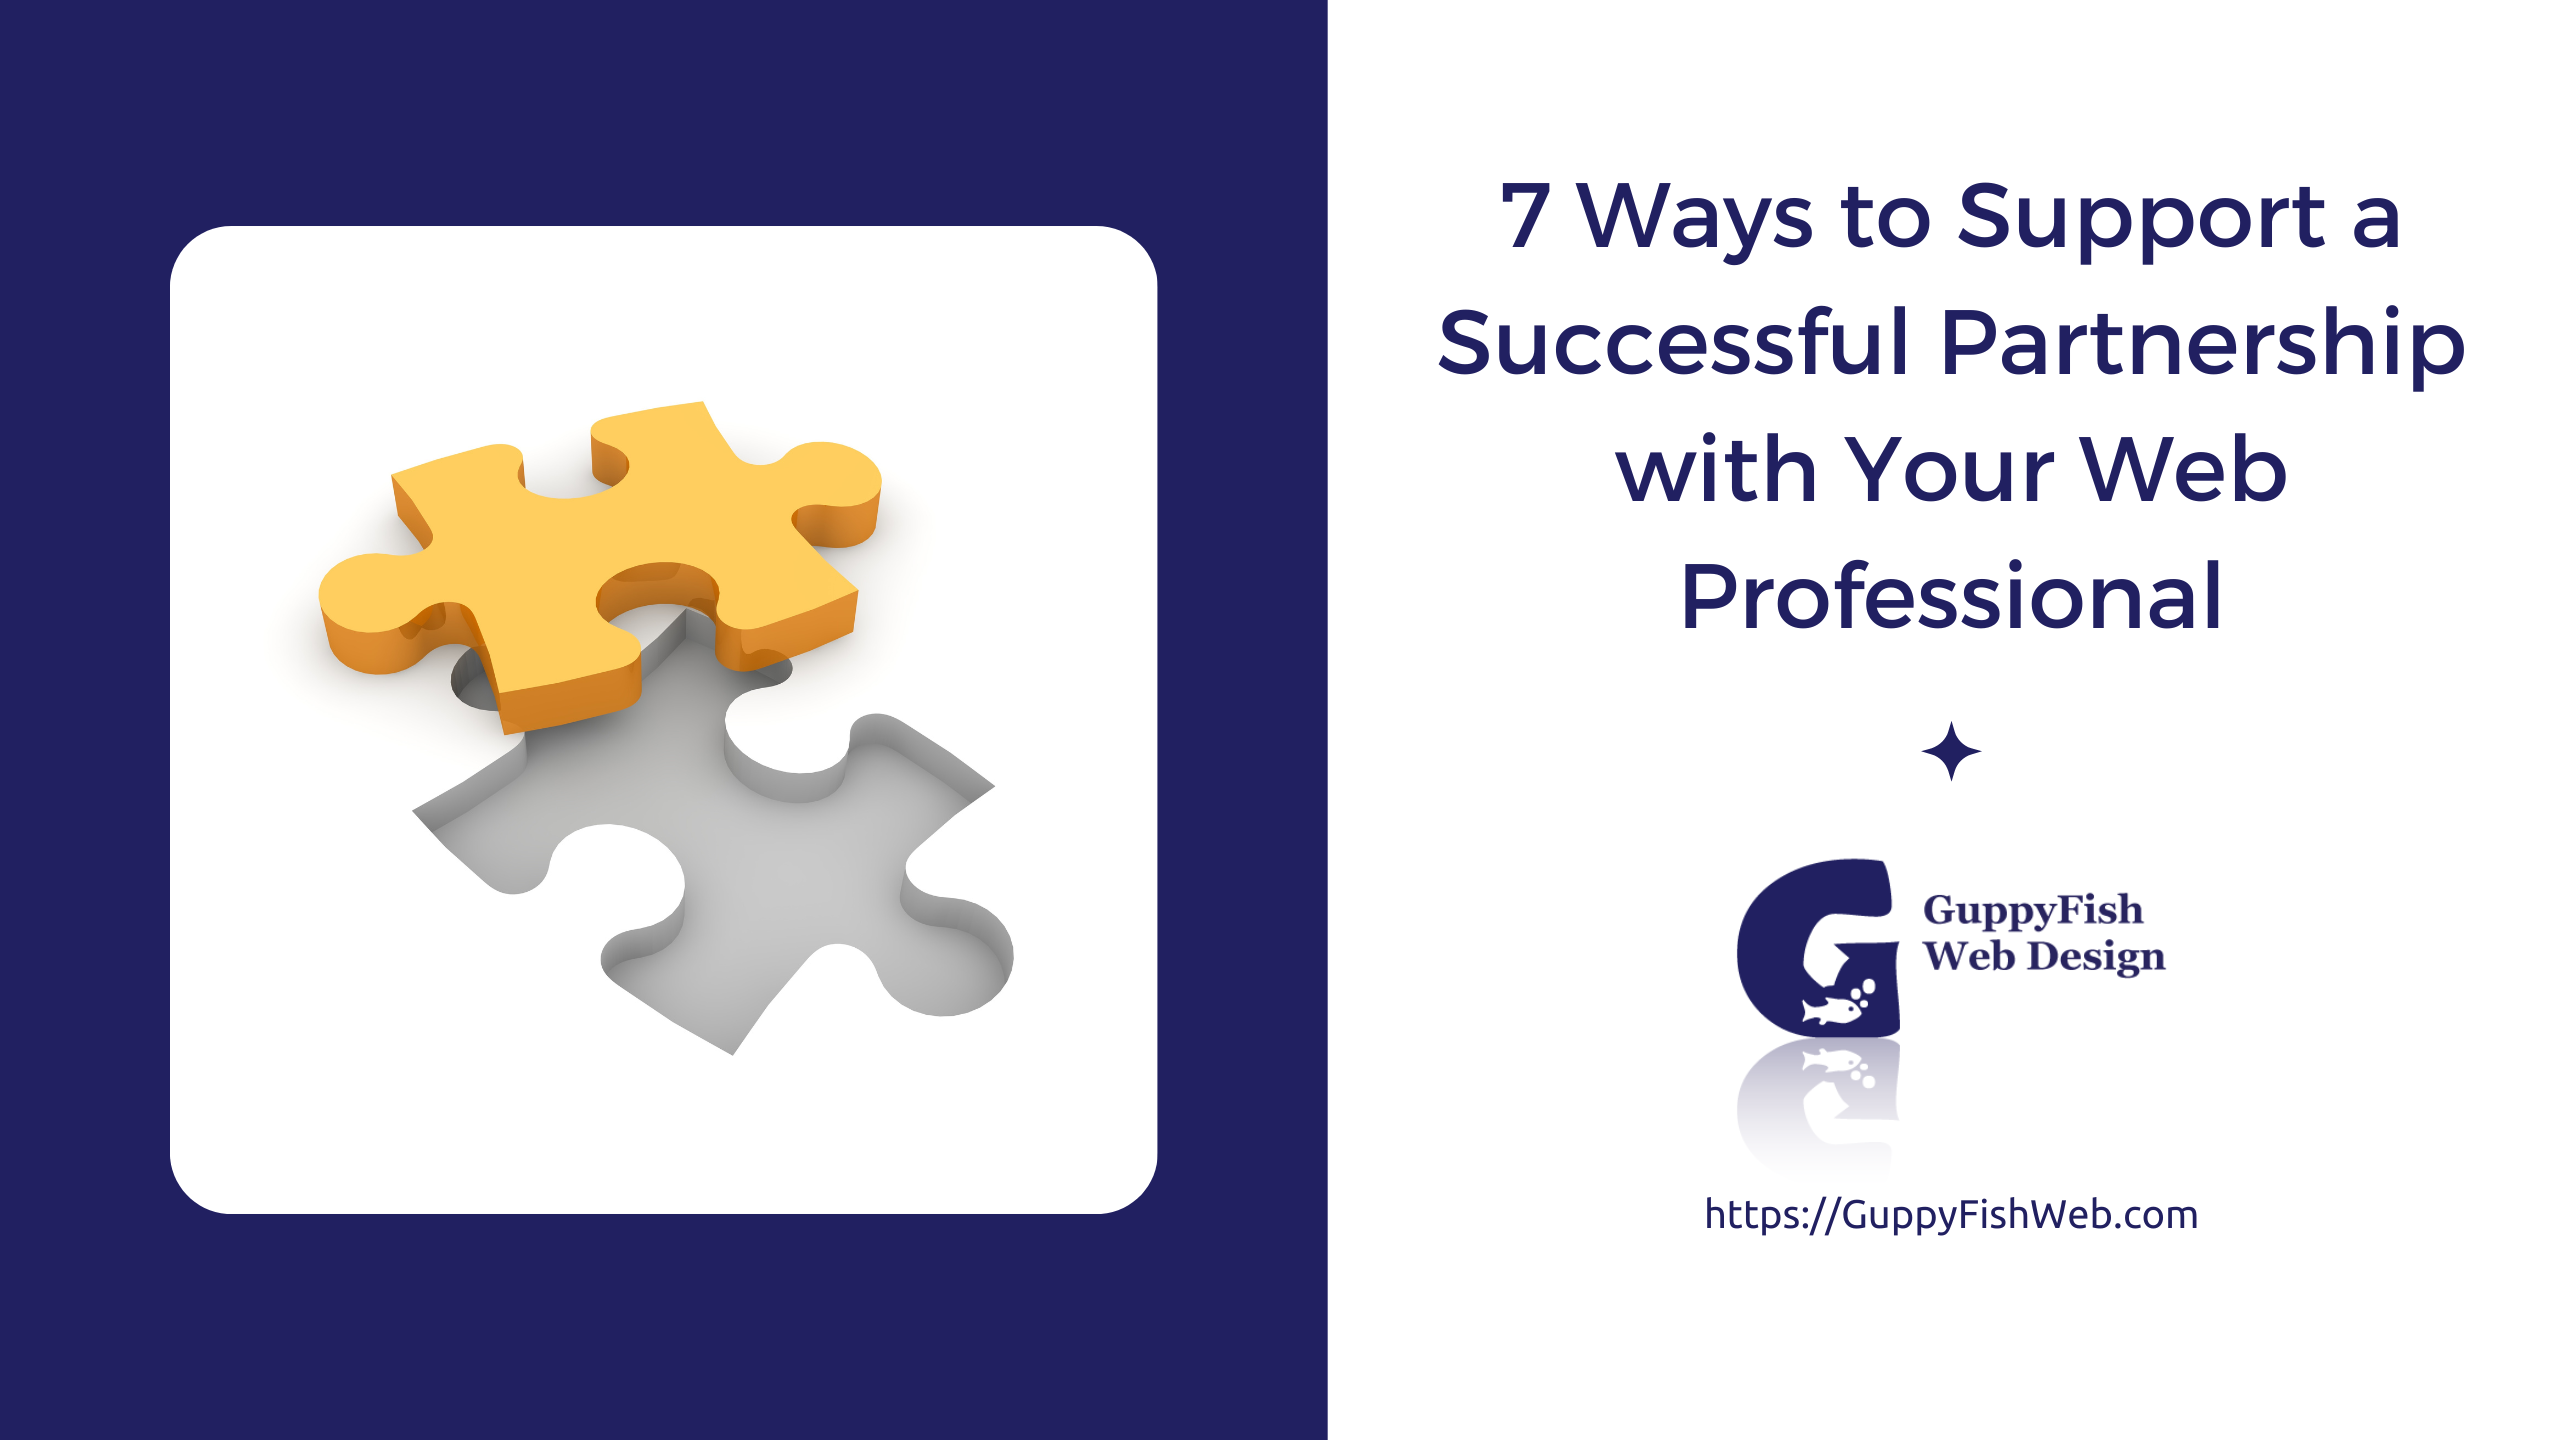 7 Ways to Support a Successful Partnership with Your Web Professional